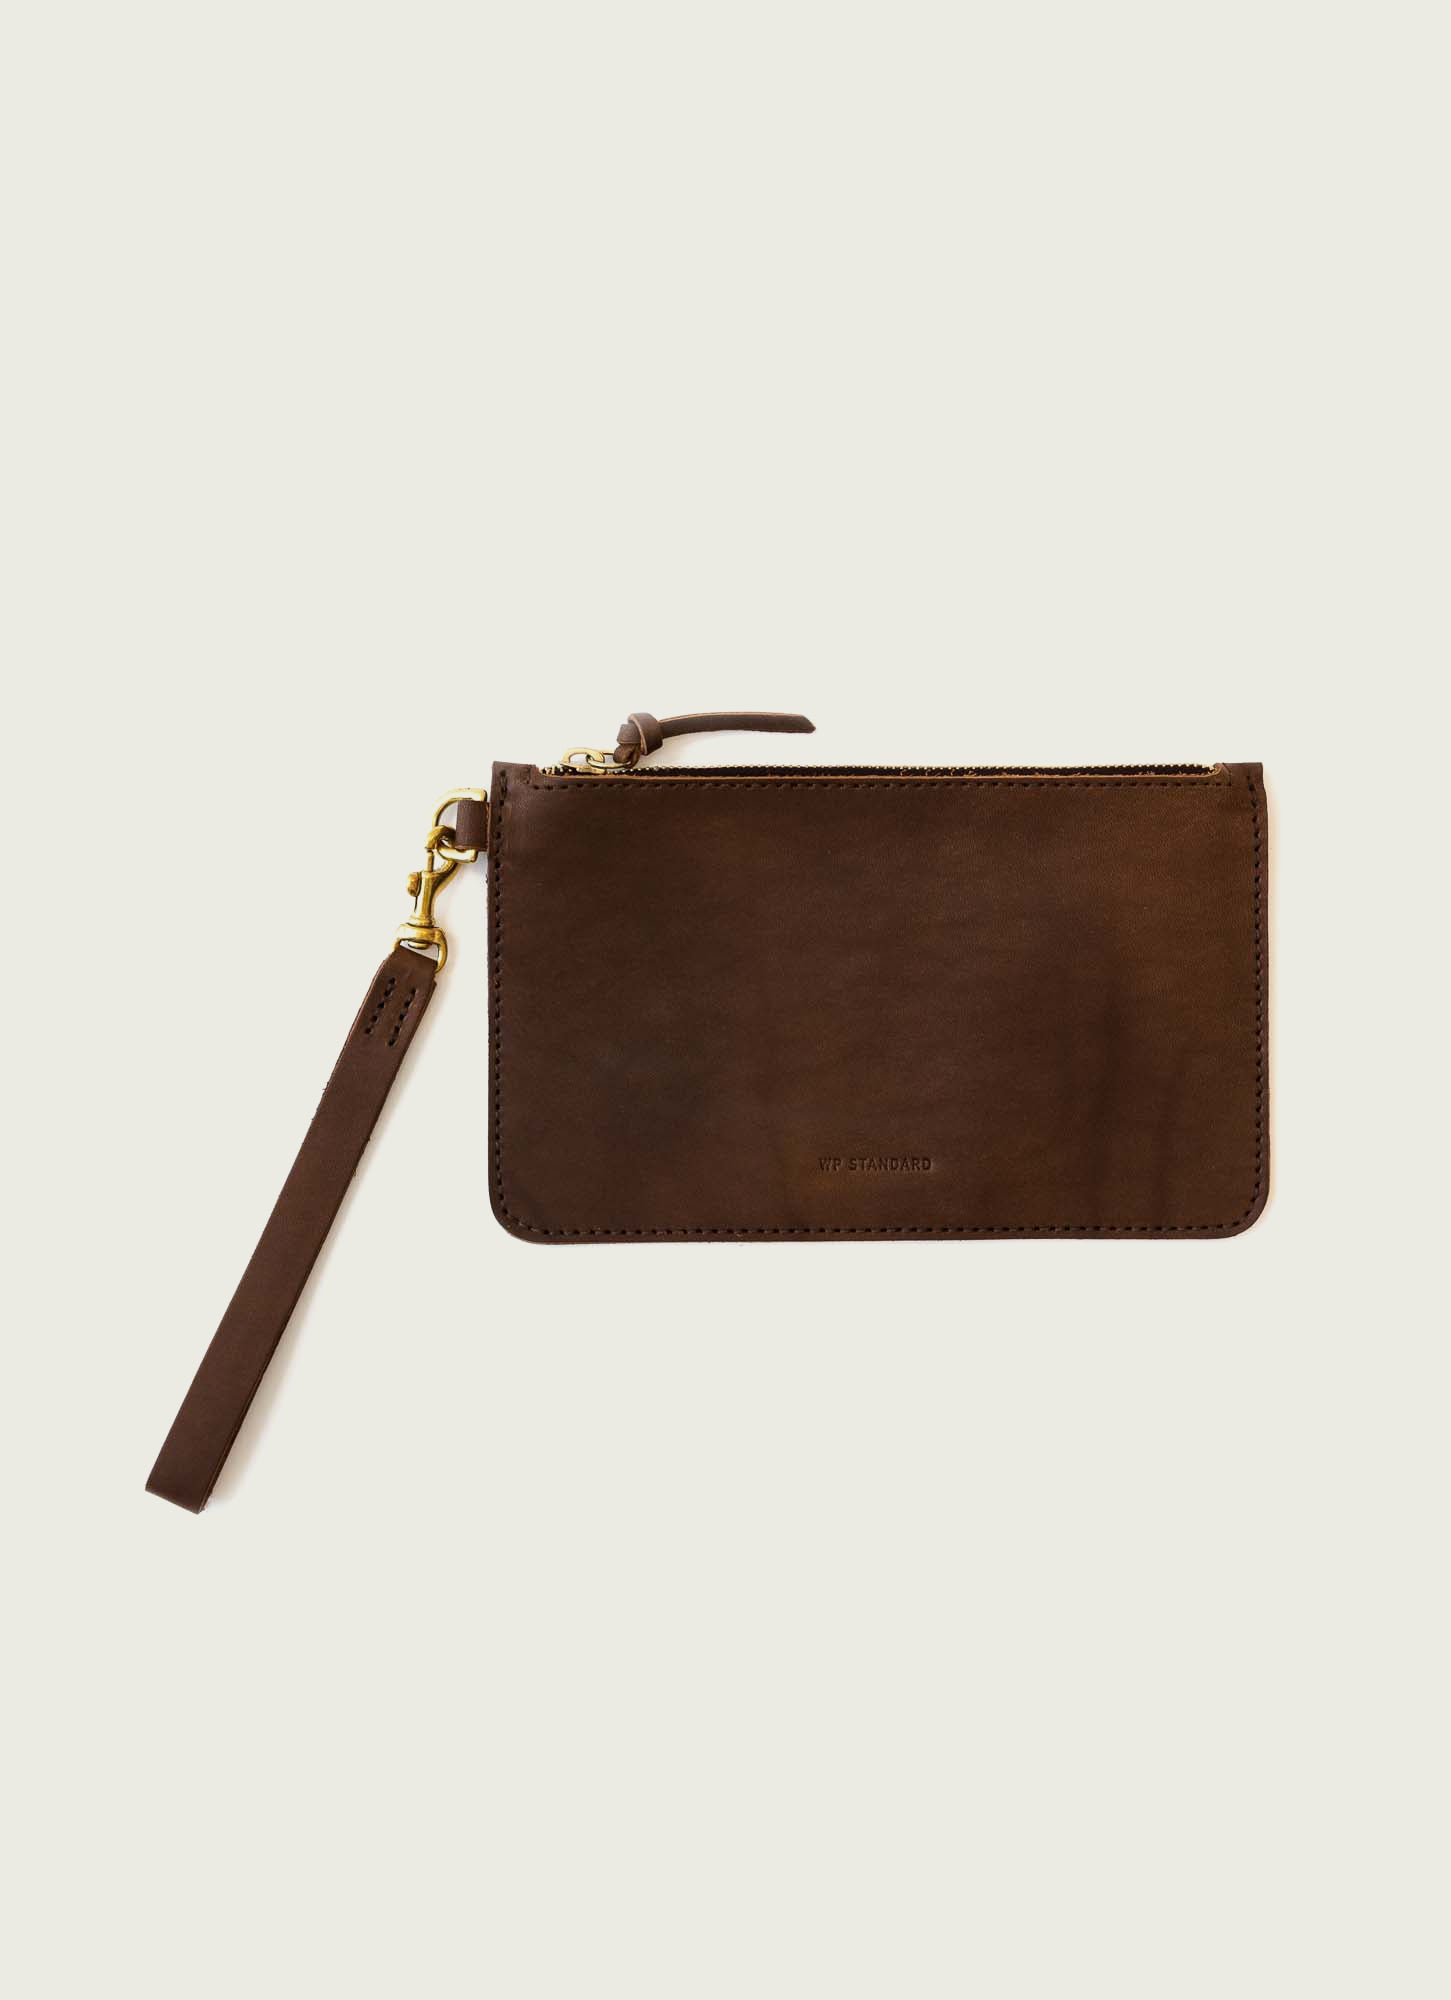 Buy Tan Pu Leather Wallet (Wallet) for INR1149.50 | Biba India